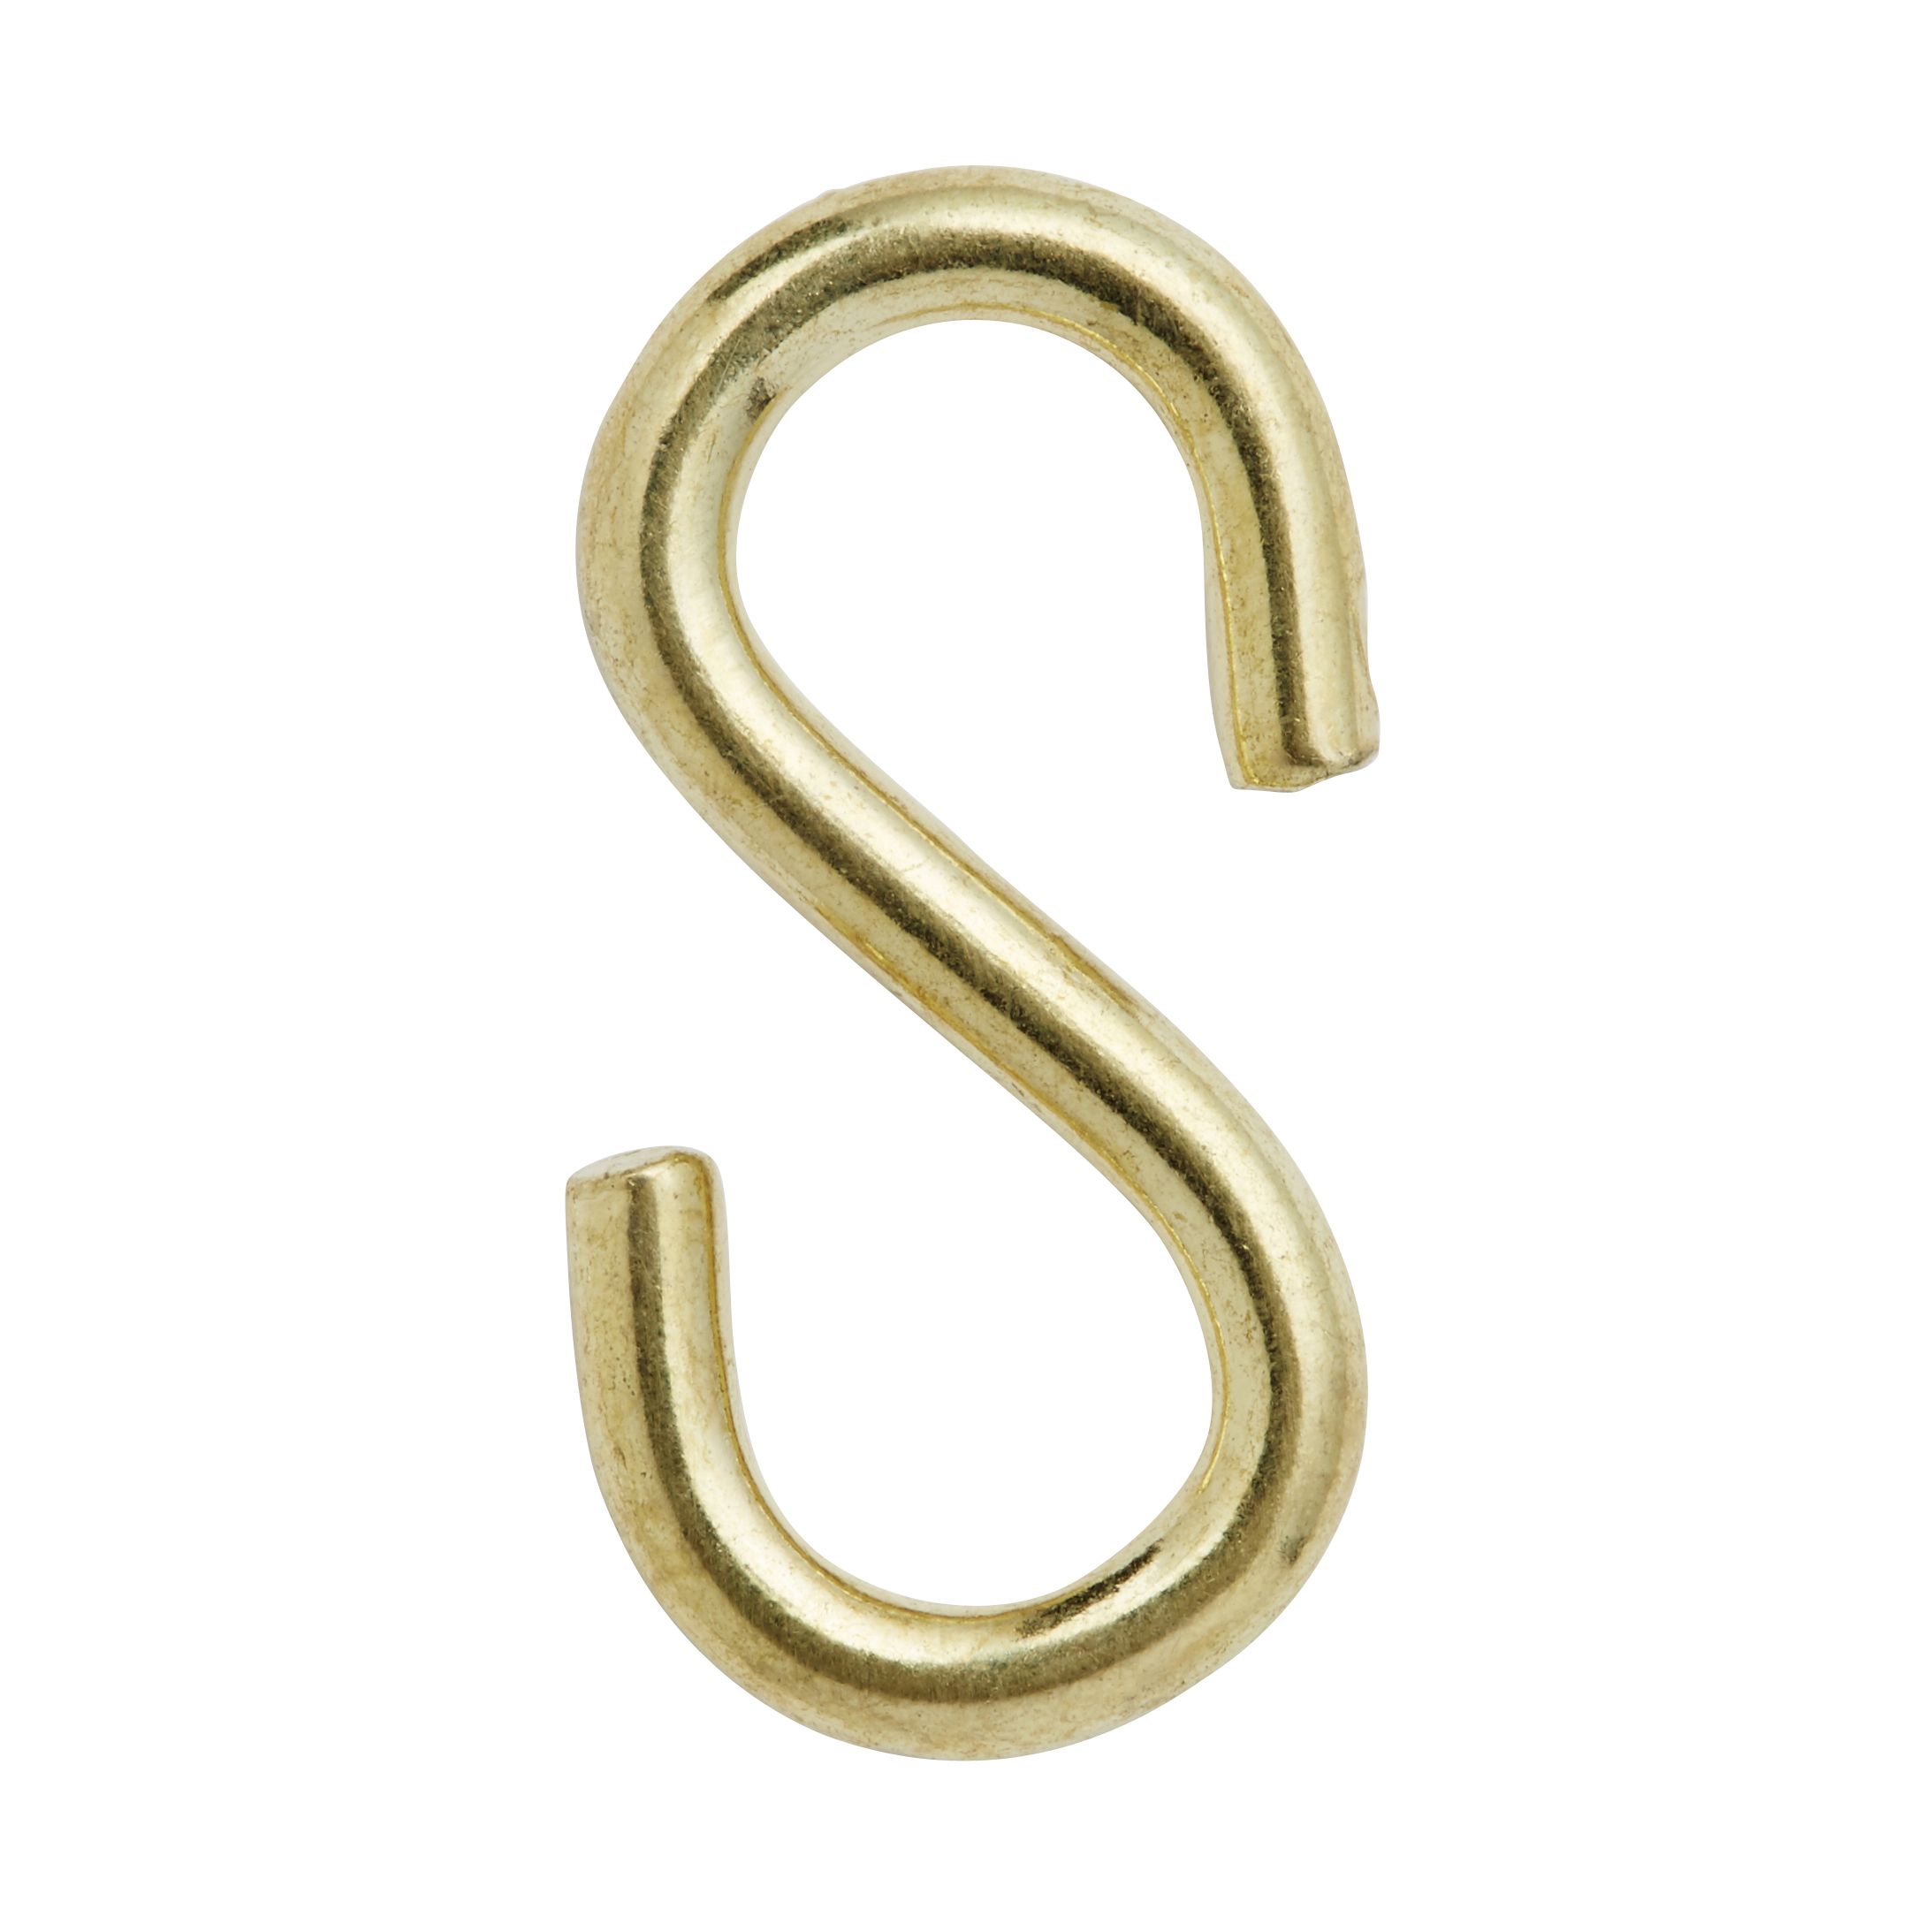 Diall Brass-plated Steel S-hook, Pack of 4